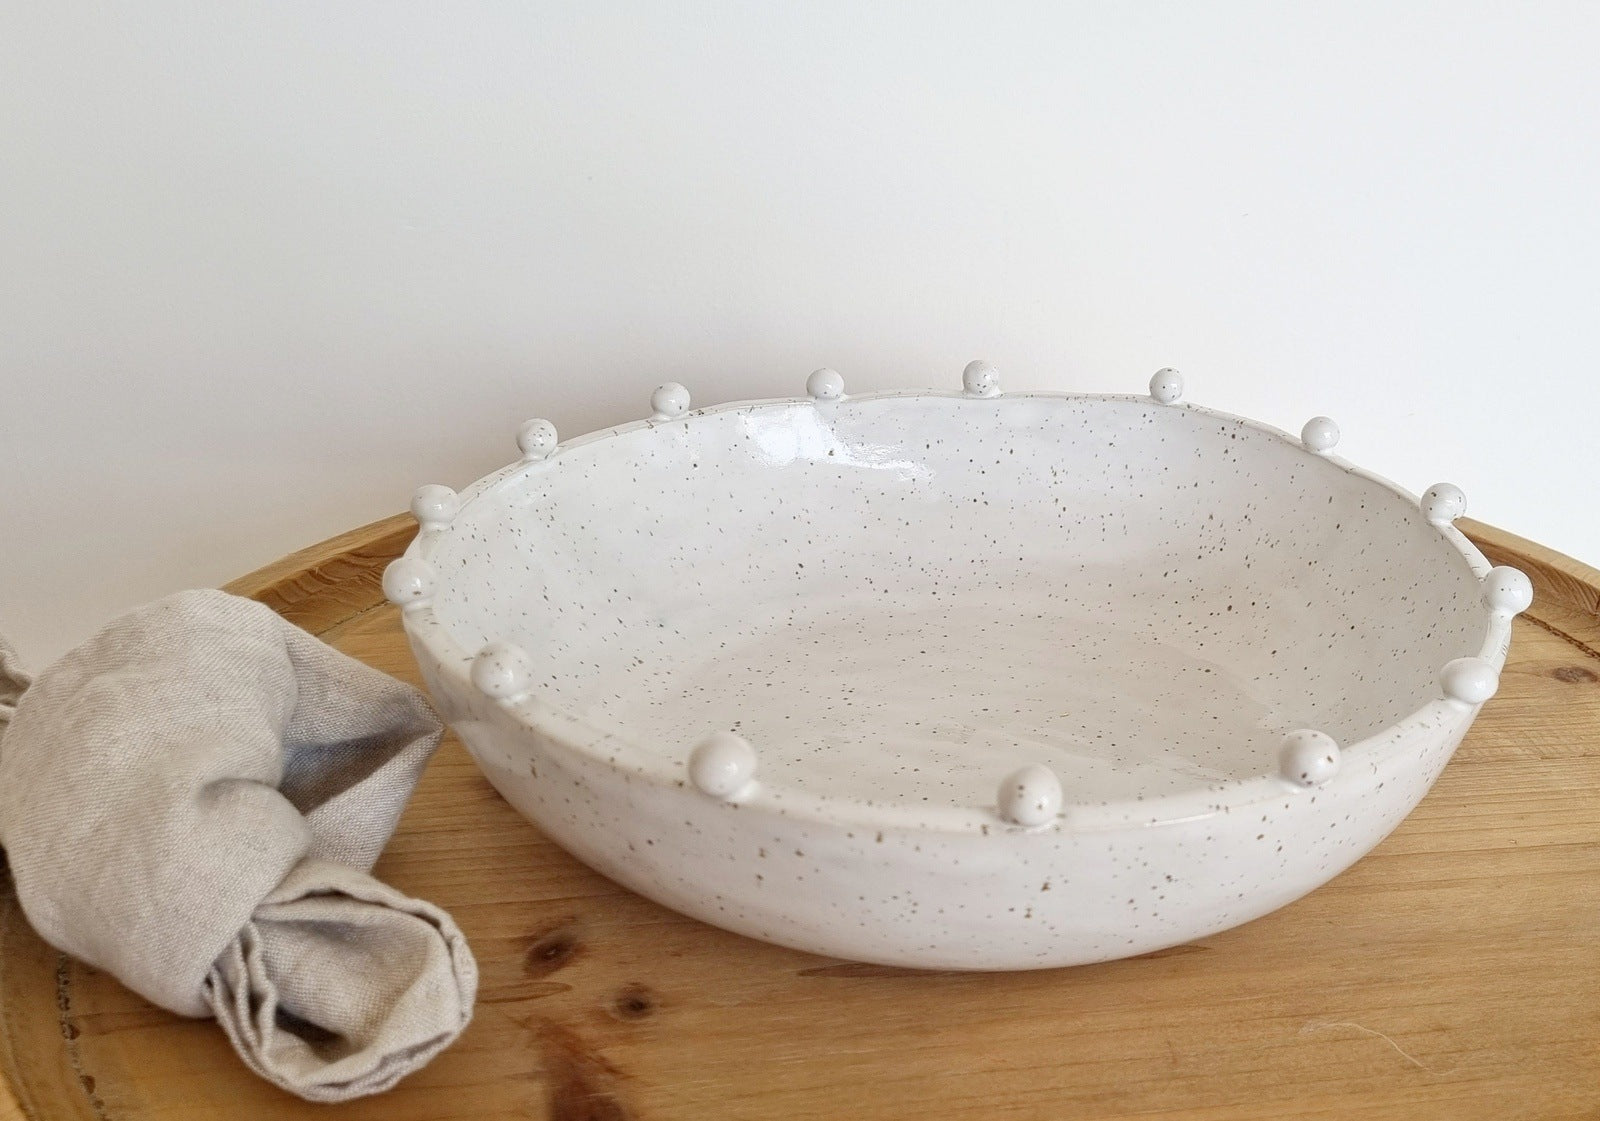 Bowl with small ceramic balls on the rim